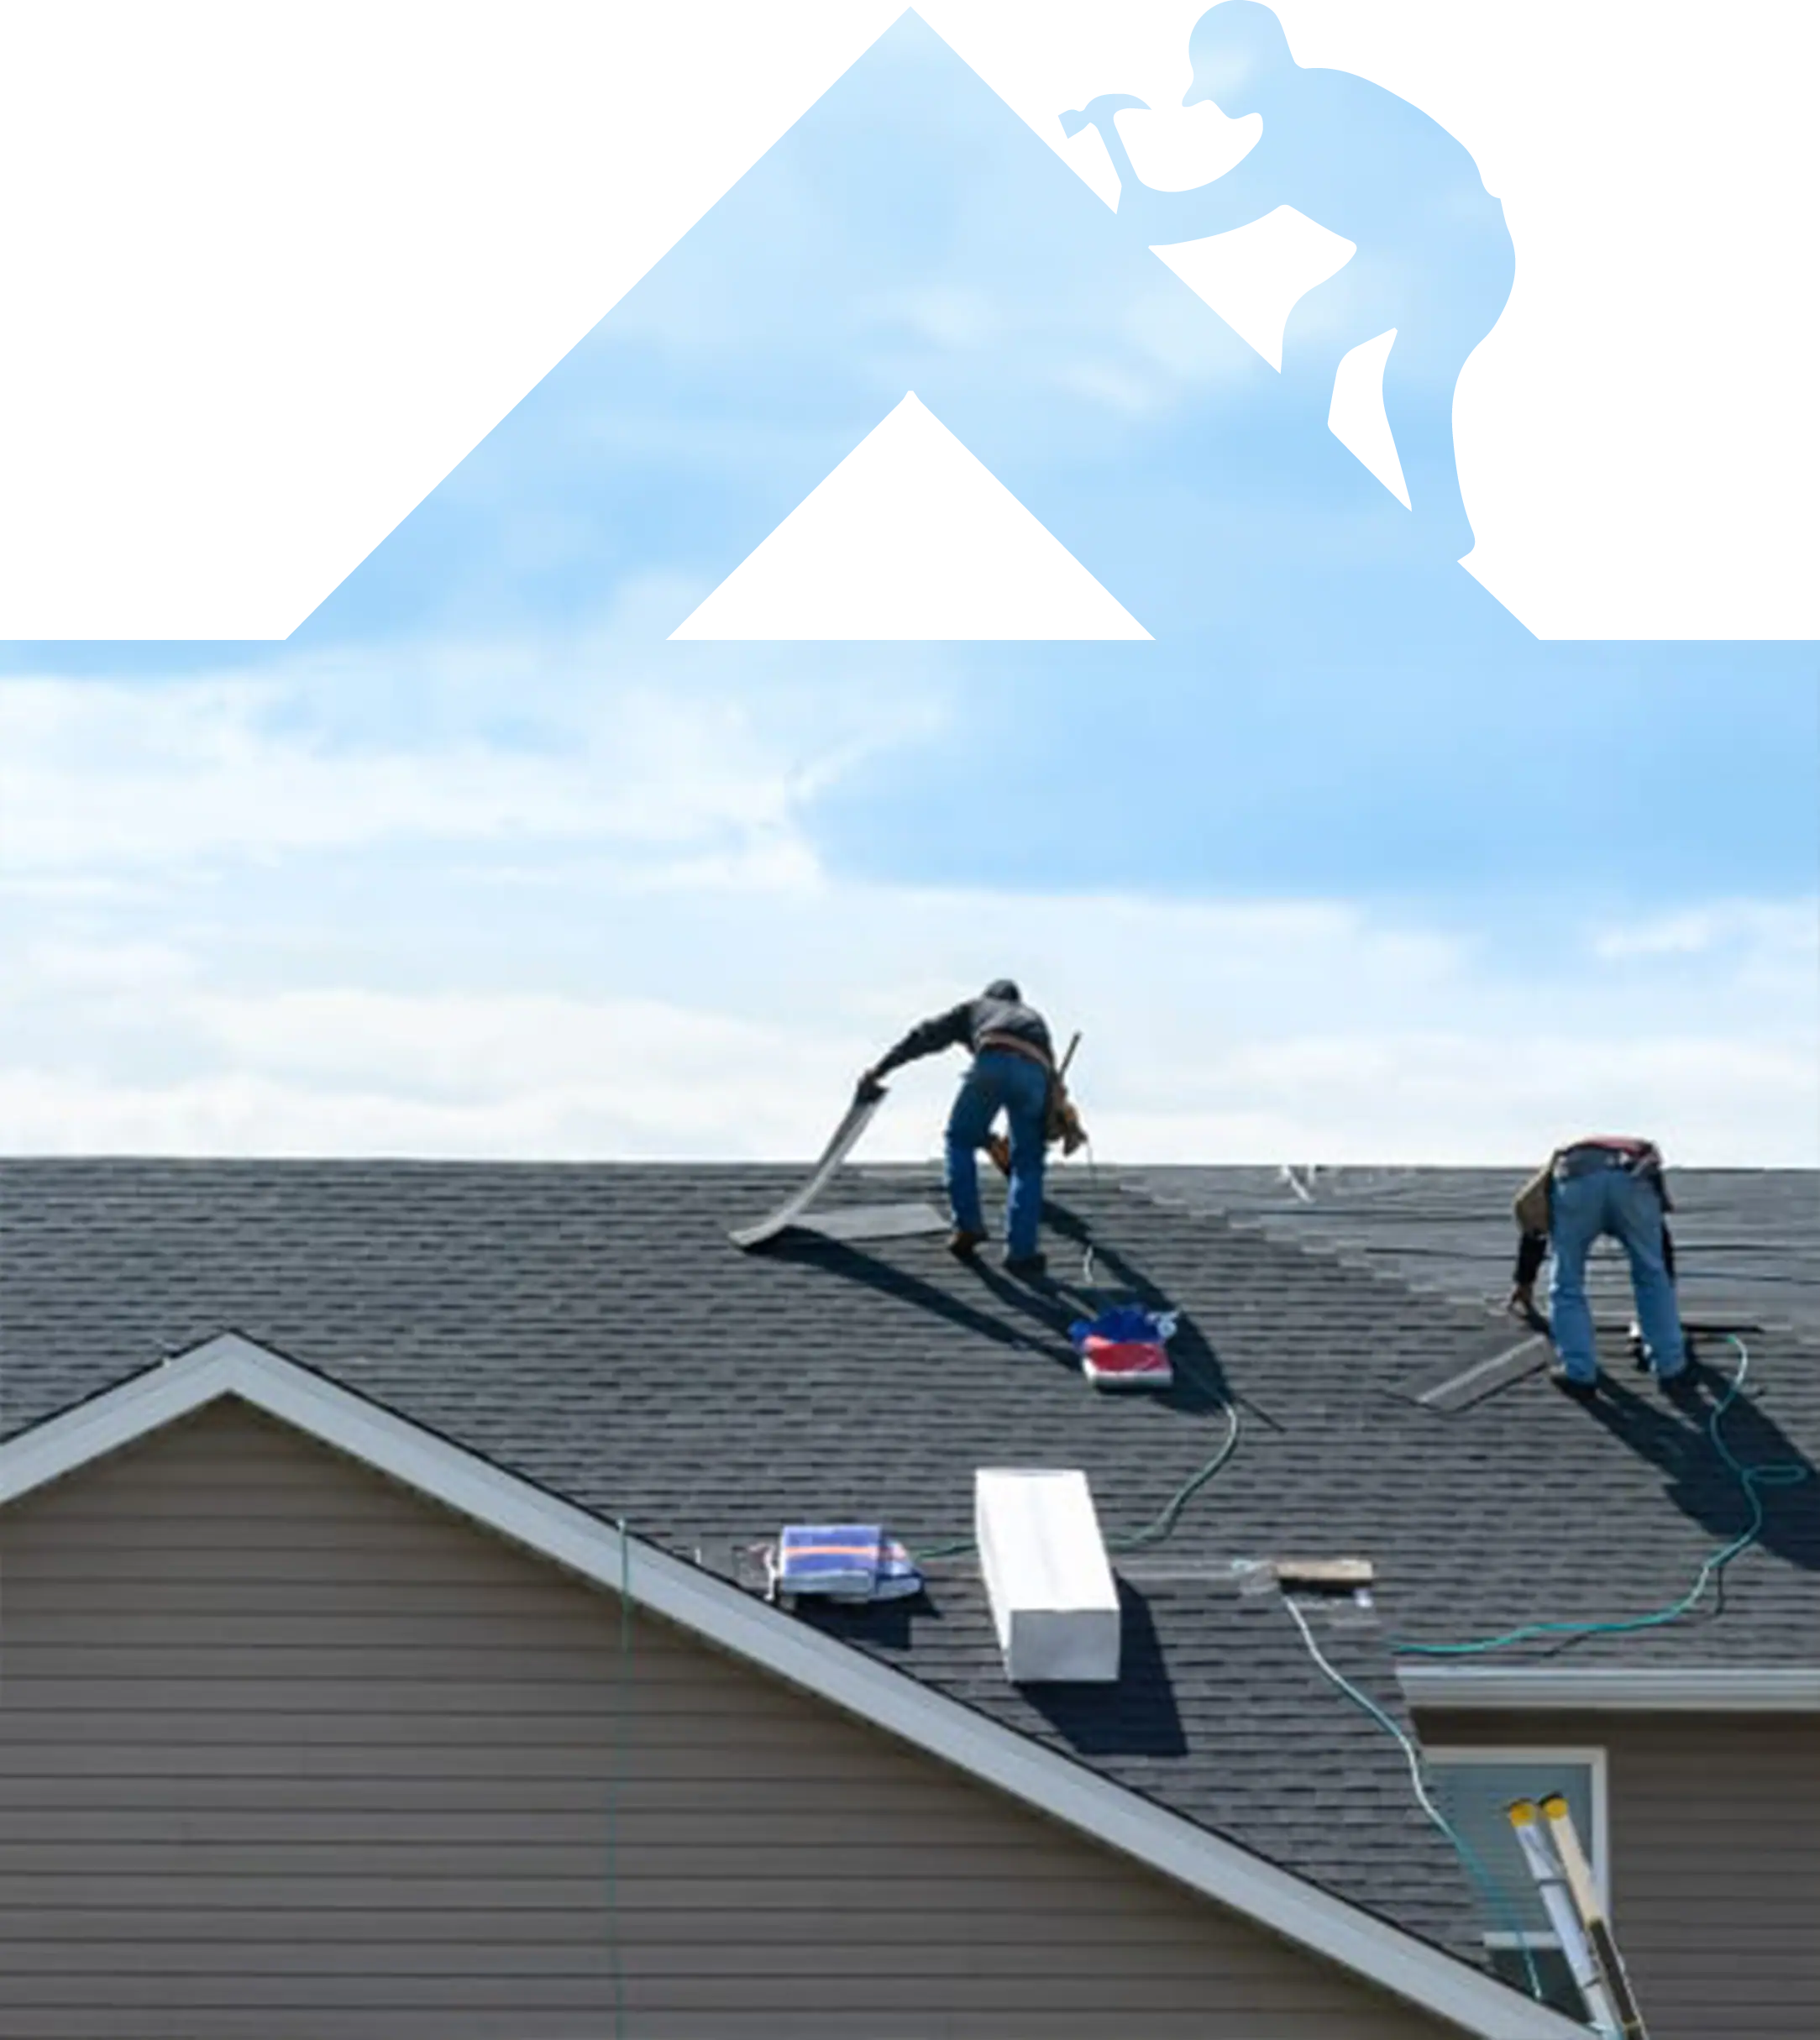 Two workers install shingles on a residential roof under a cloudy sky, discussing financing options.